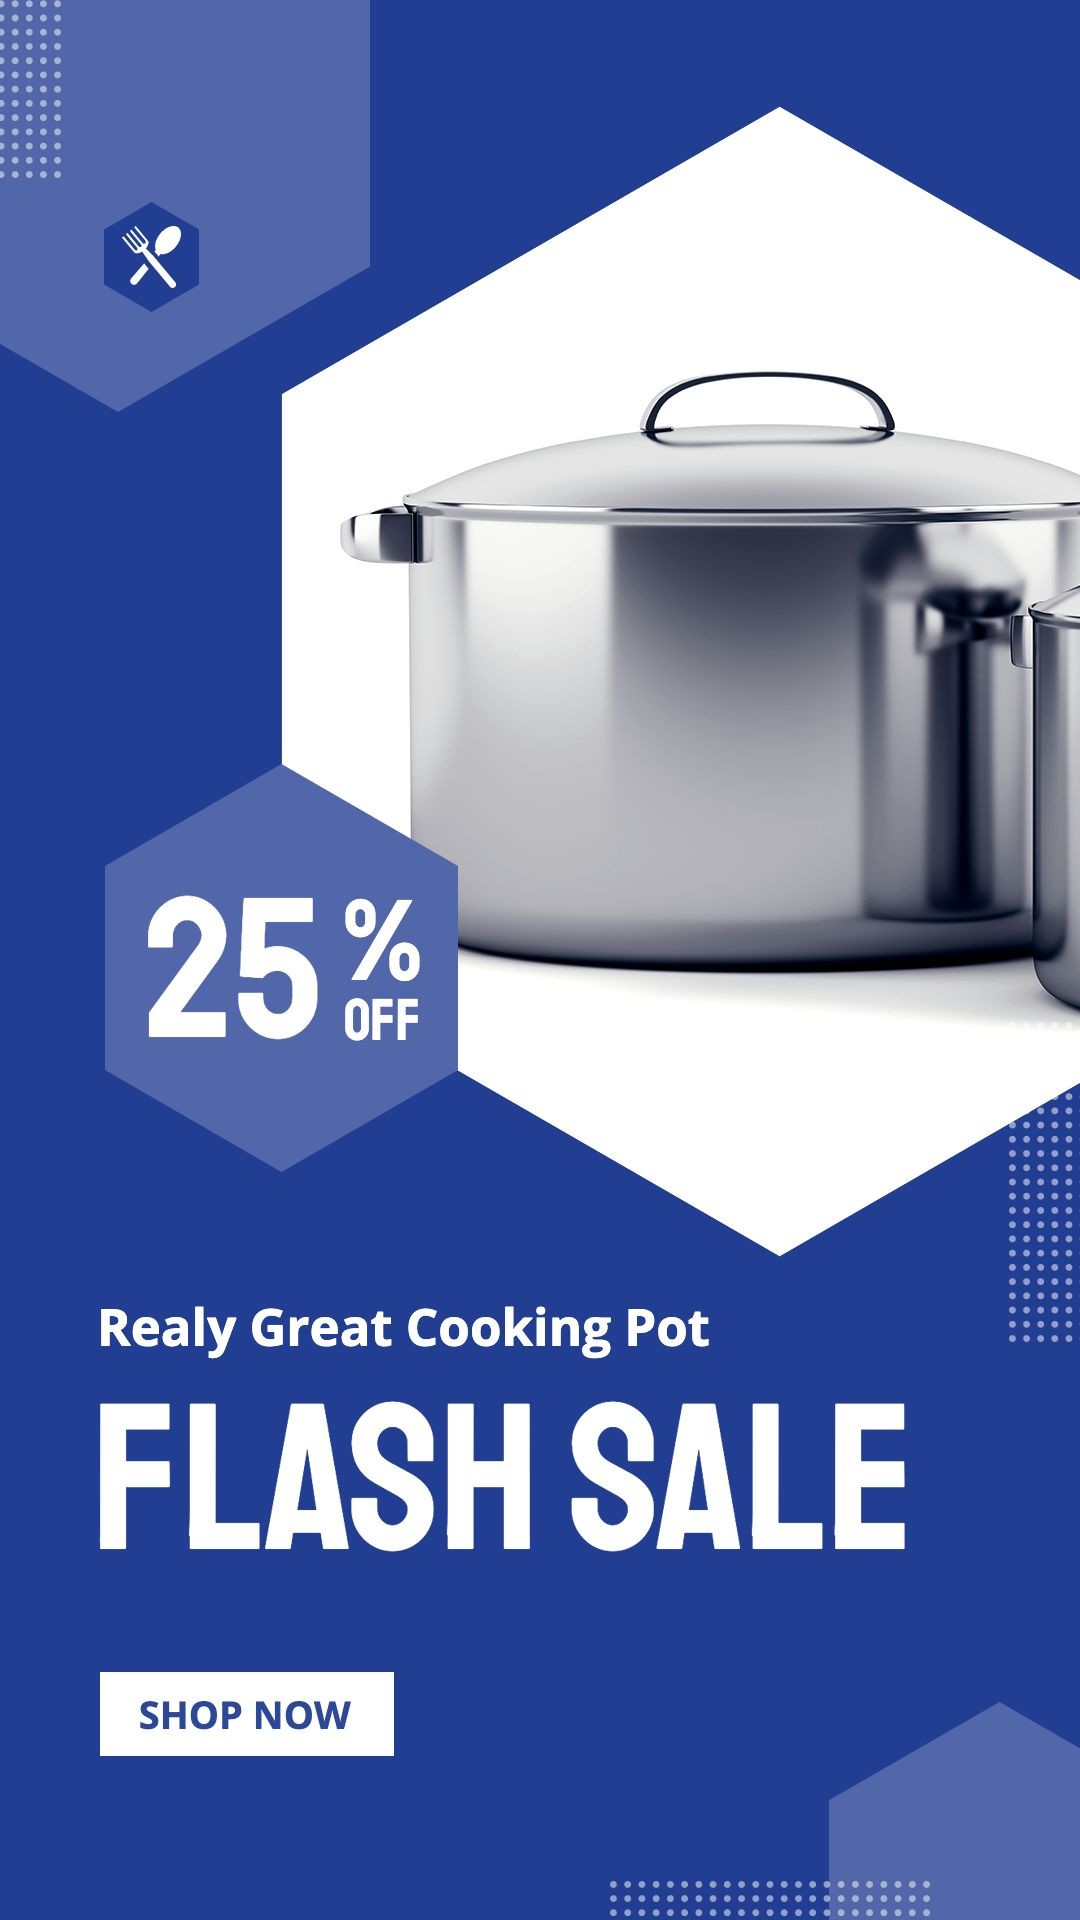 Kitchenware Cookware Sale Promo Ecommerce Story预览效果